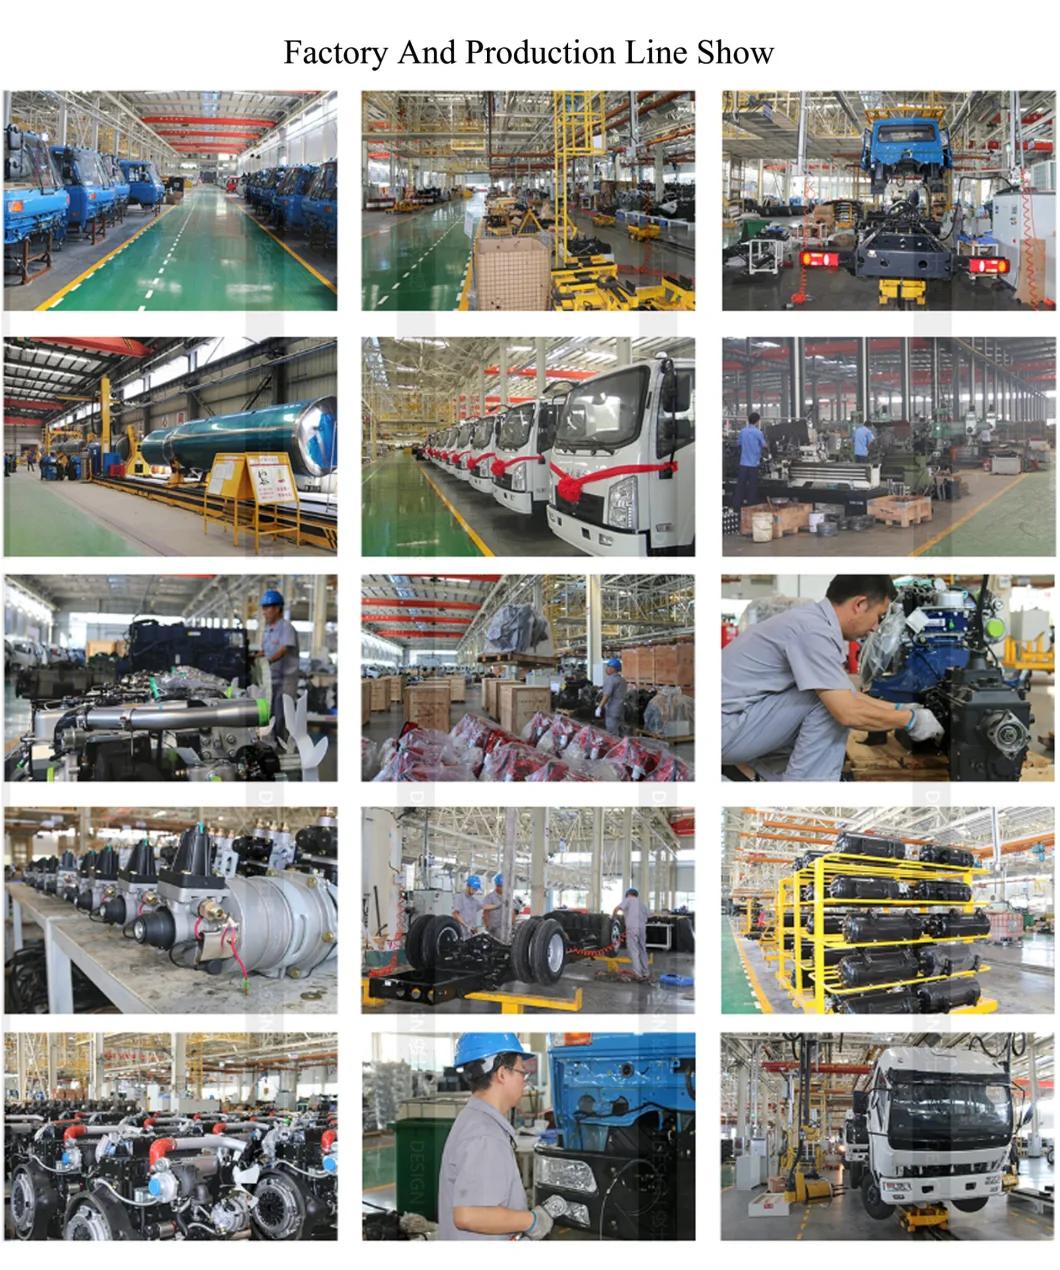 Hbqz Sq200zb4 10 Tons Hydraulic Knuckle Boom Truck Mounted Crane From Chinese Factory Made in China Cylinder